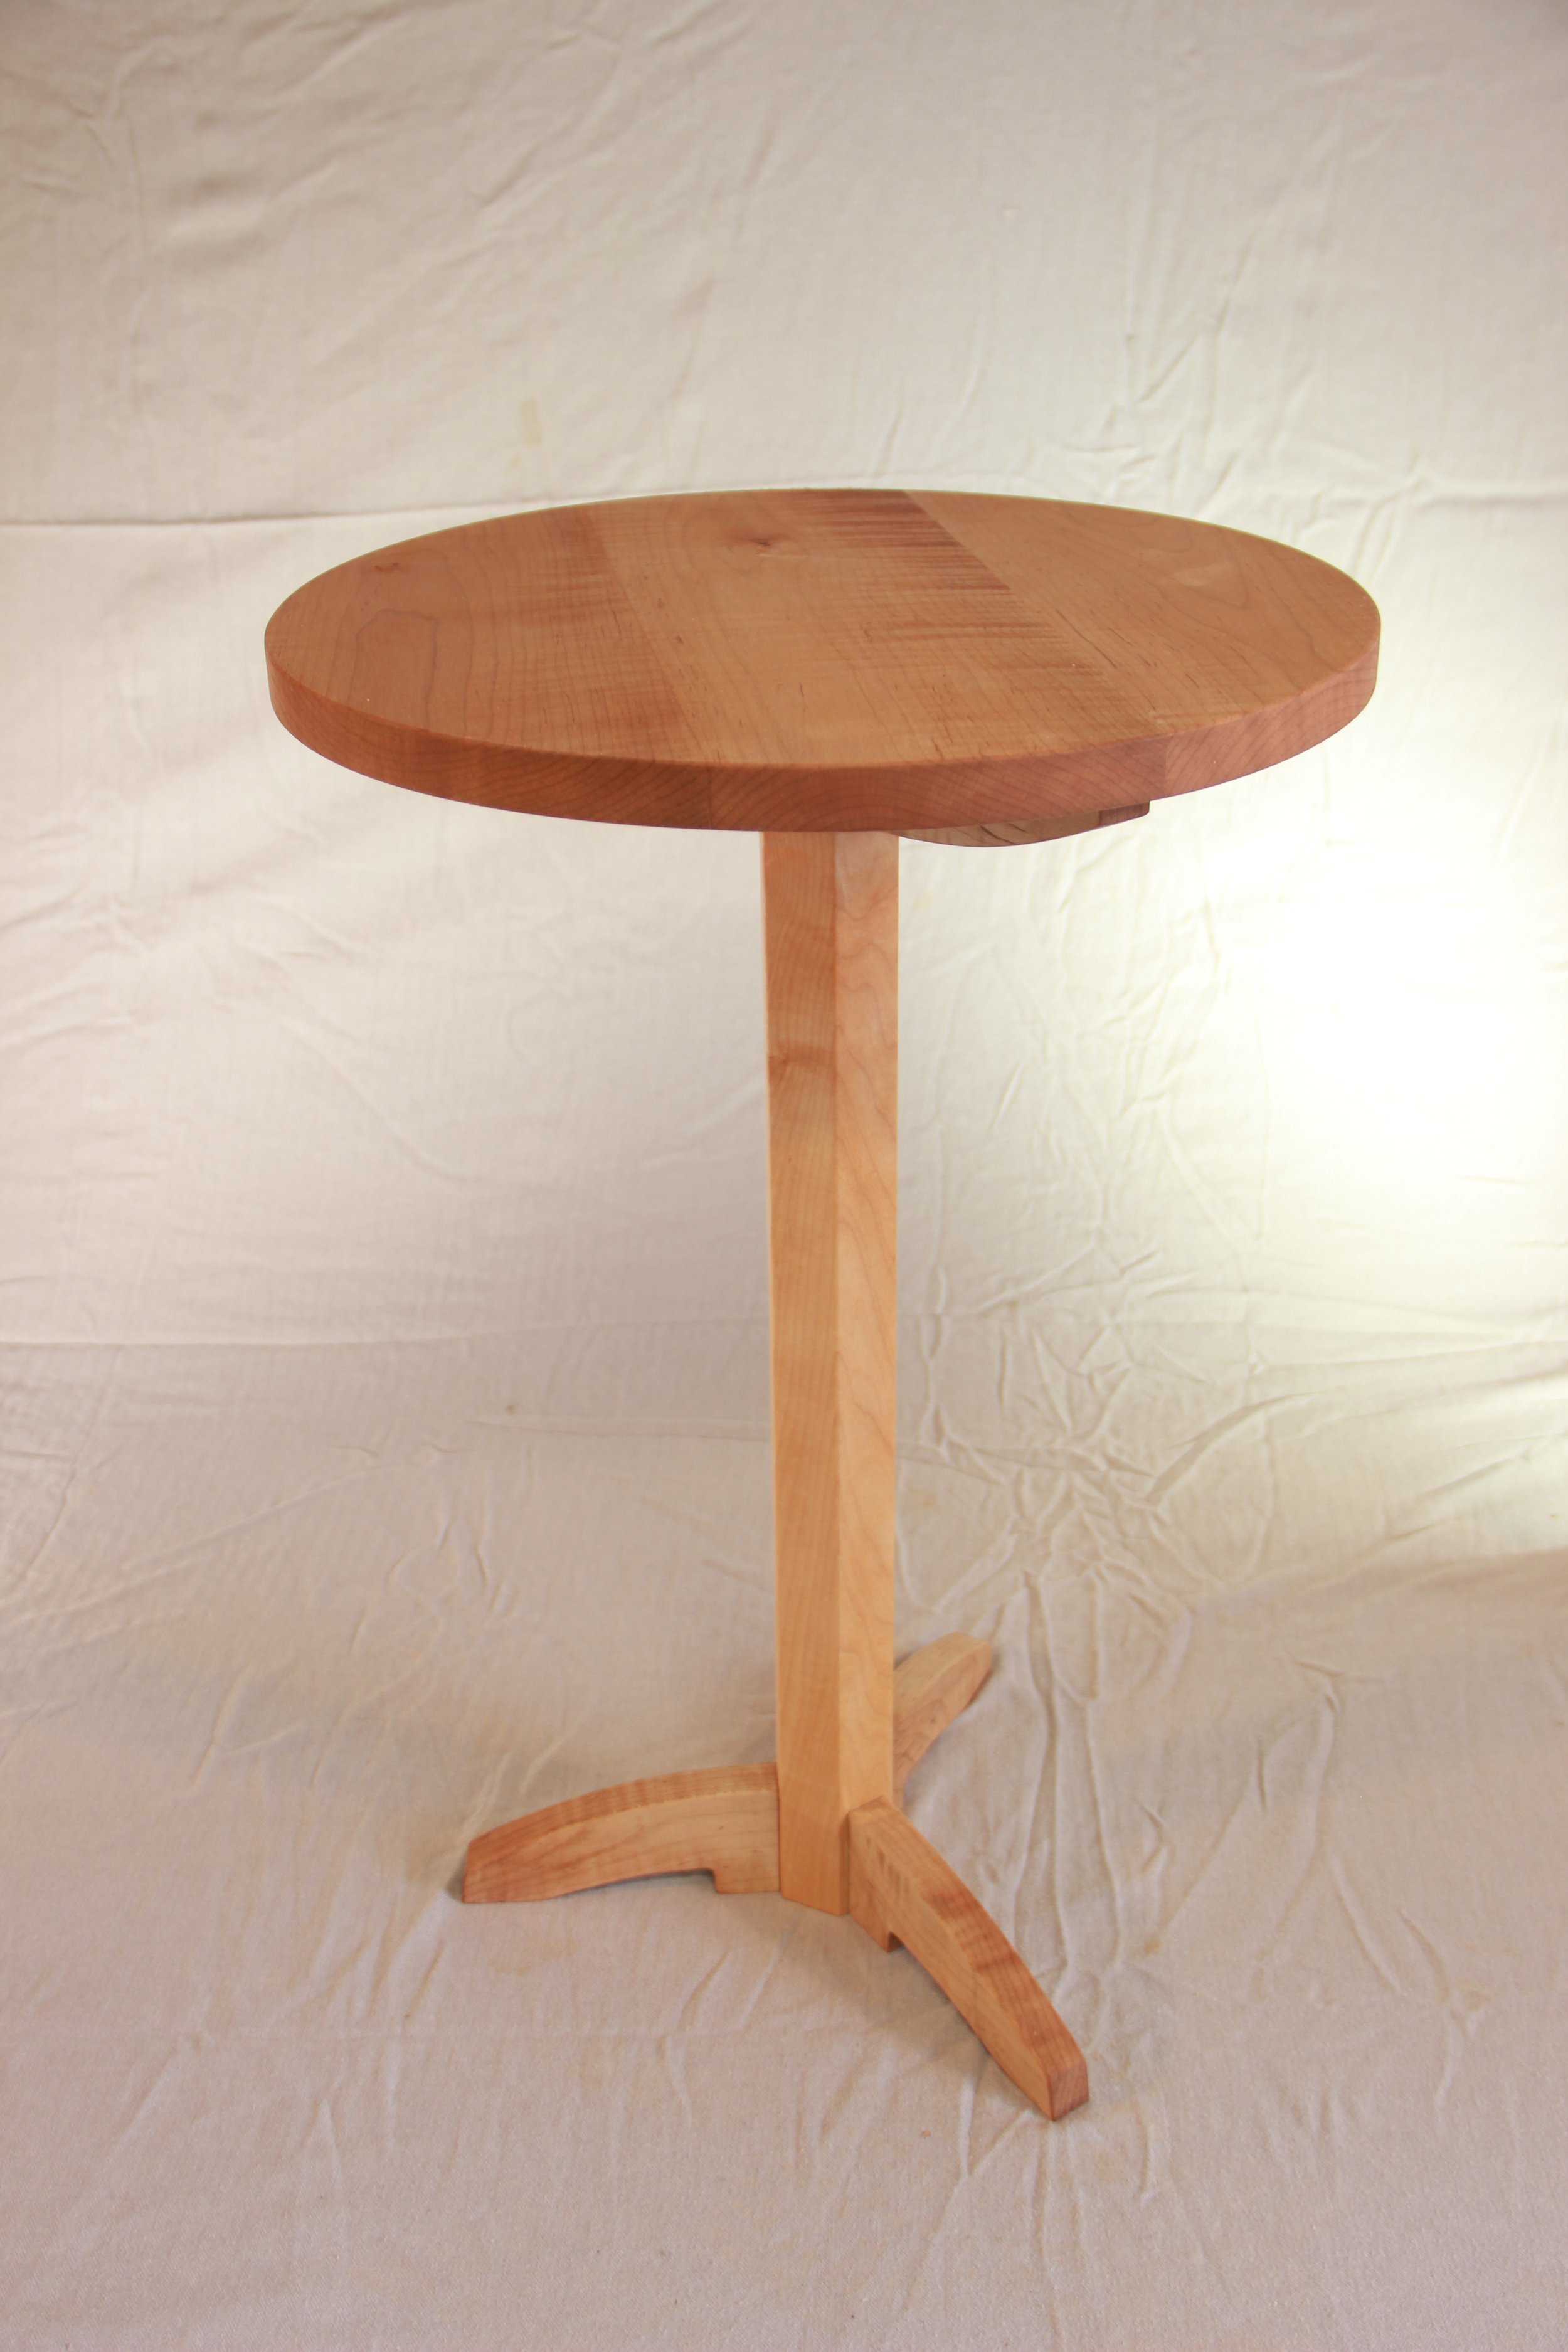 Maple occassional table